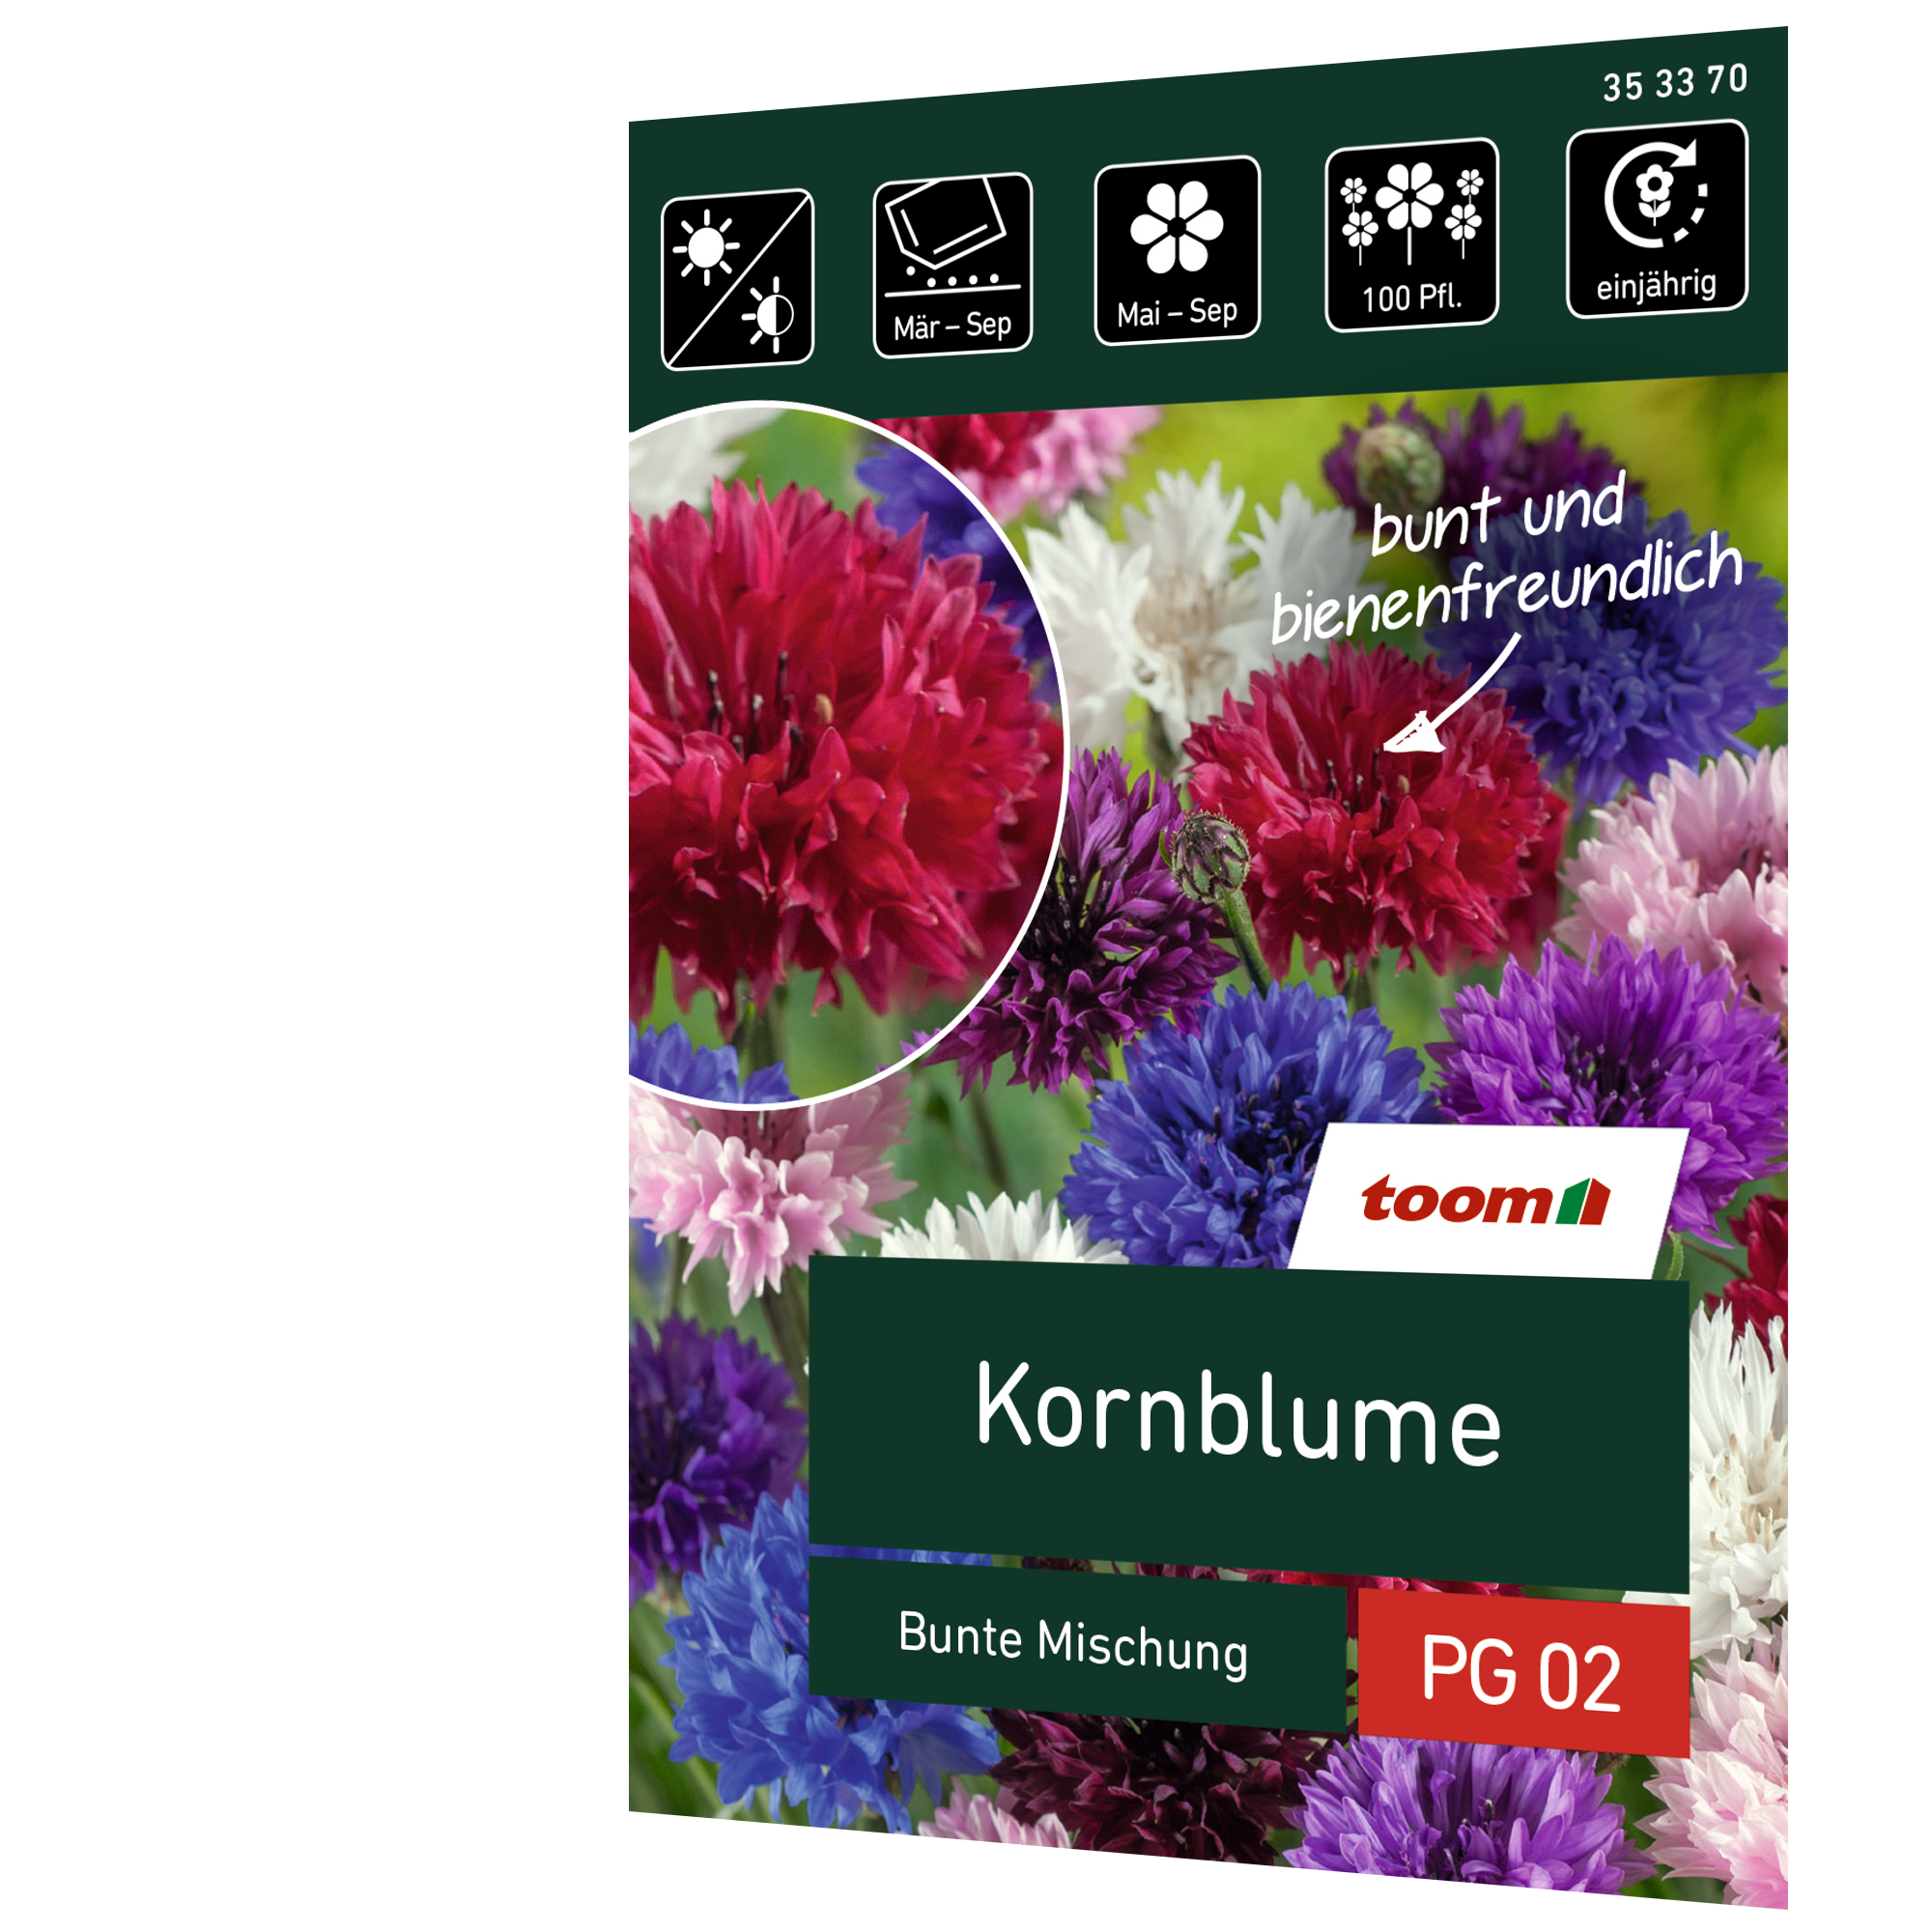 Kornblume 'Bunte Mischung' + product picture